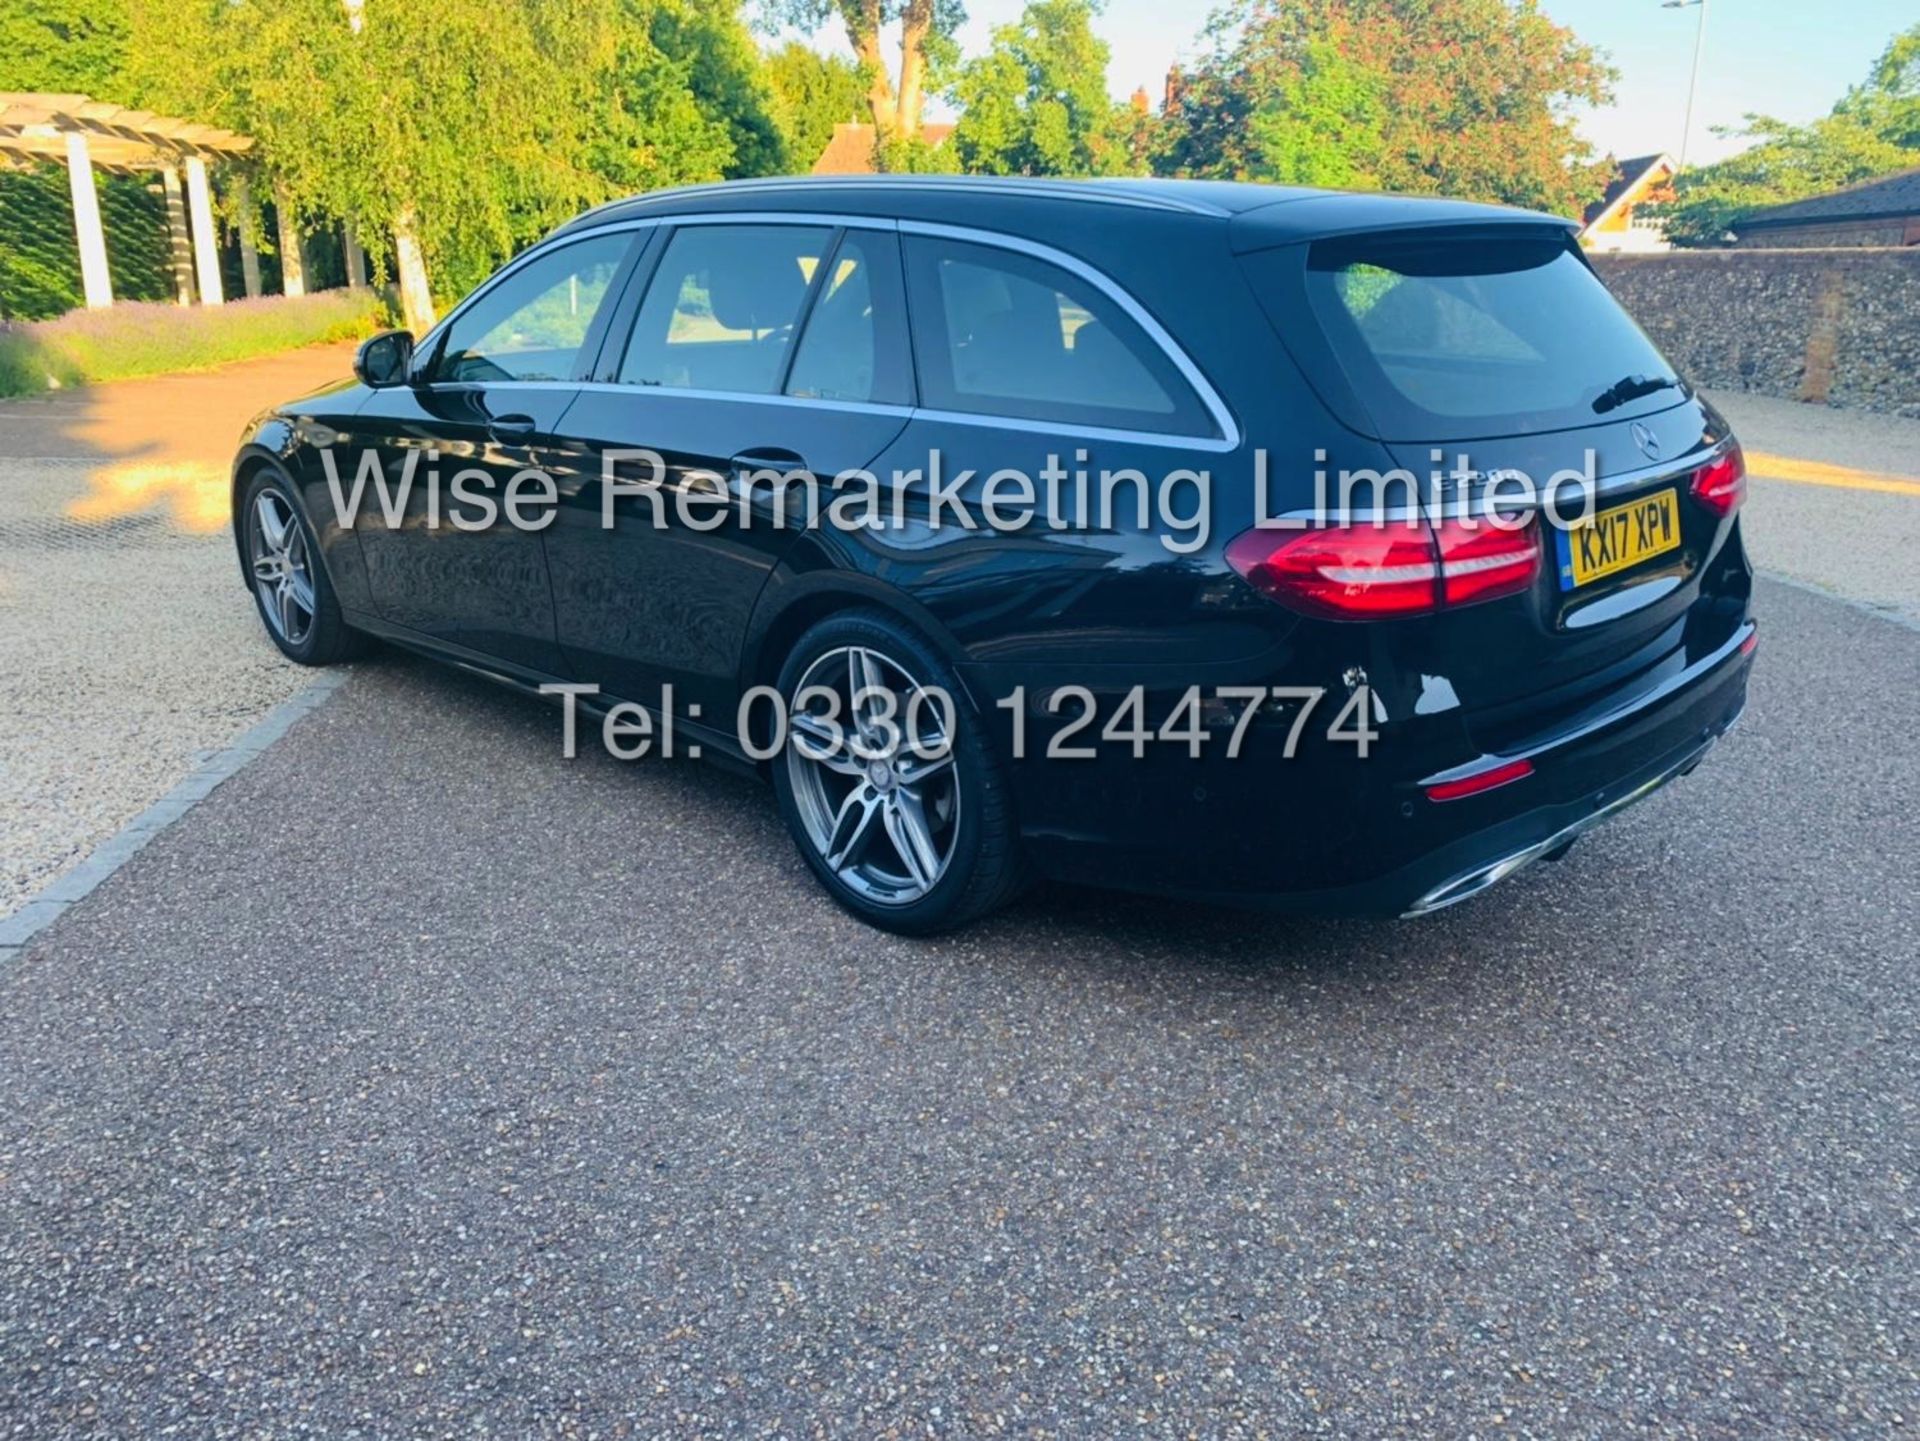 MERCEDES E CLASS ESTATE E220D AMG LINE 2017 / 9G -TRONIC / *LOW MILES* / 1 OWNER - Image 13 of 42